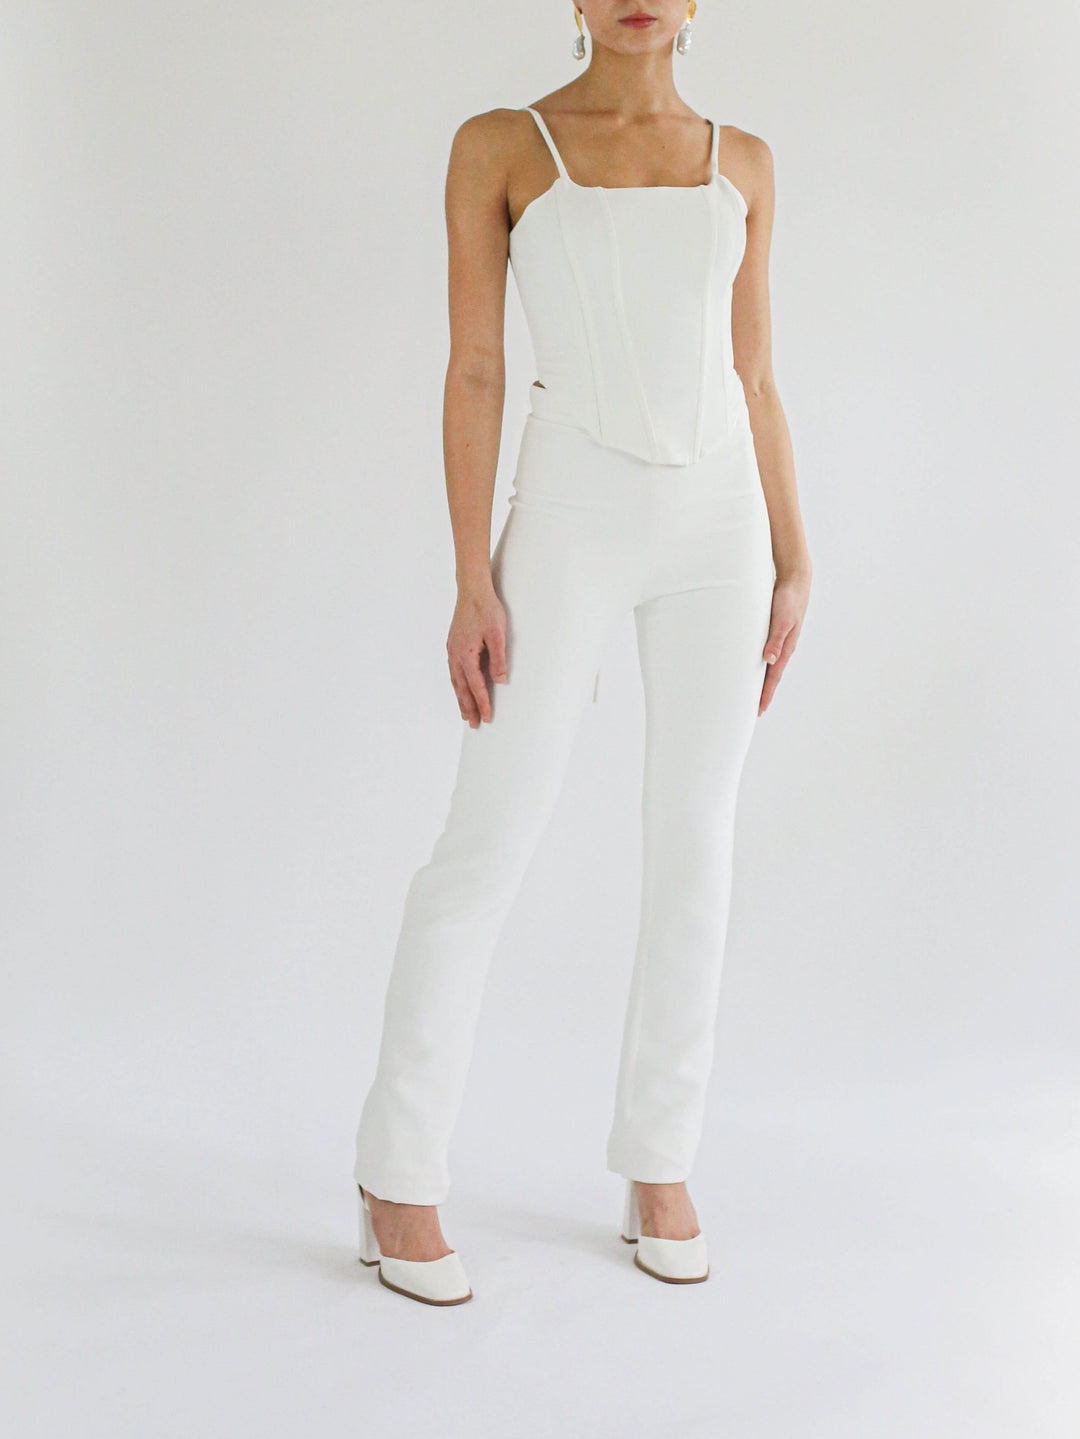 Elevate your bridal look with Hello Bride Crepe Pants